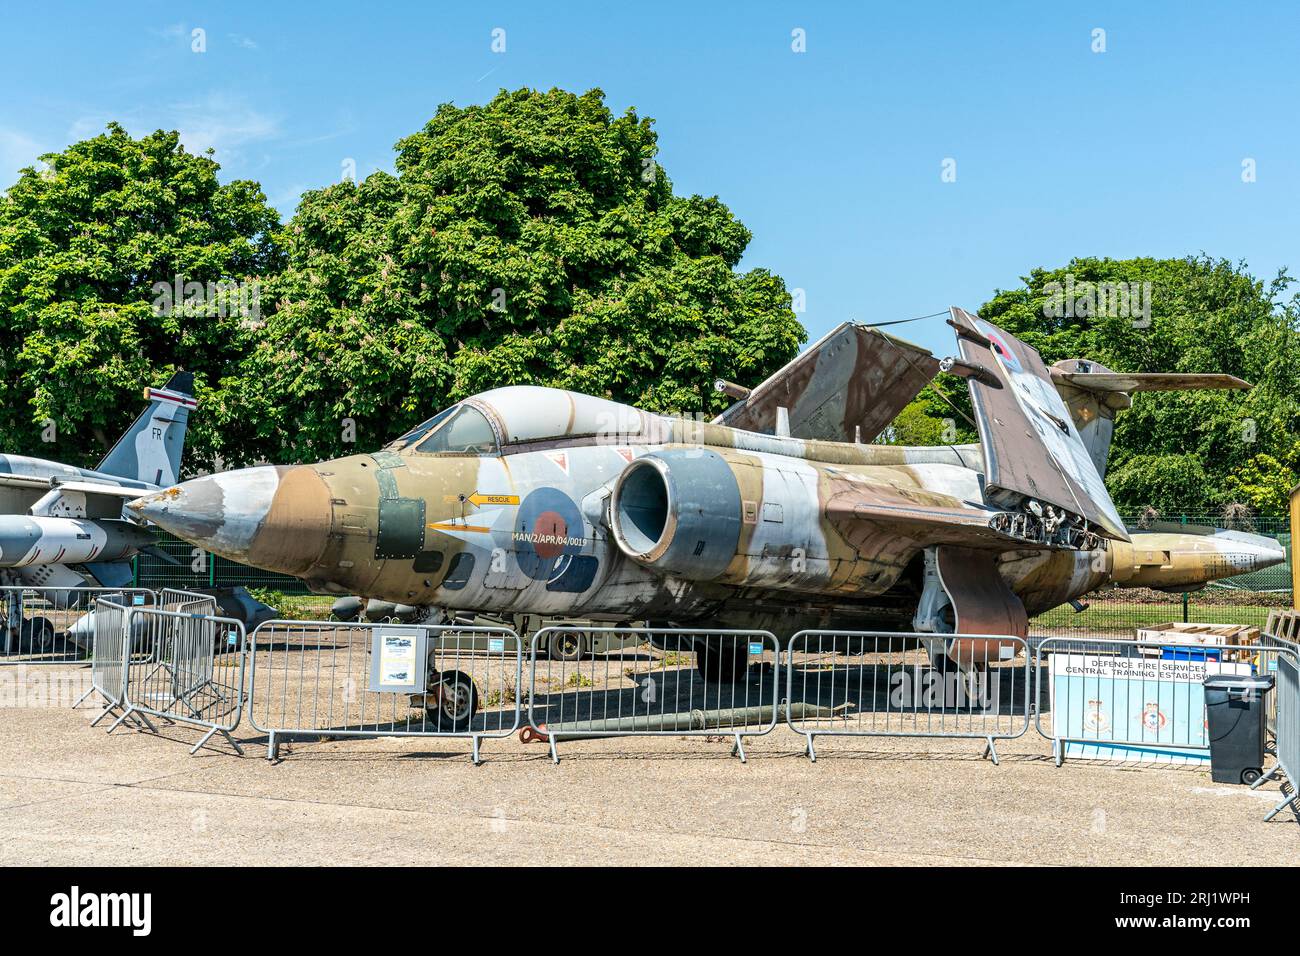 RAF fighter bomber Blackburn Buccaneer, with its wings folded, on display outside at the RAF Manston History Museum in Kent. Summertime, blue sky. Stock Photo